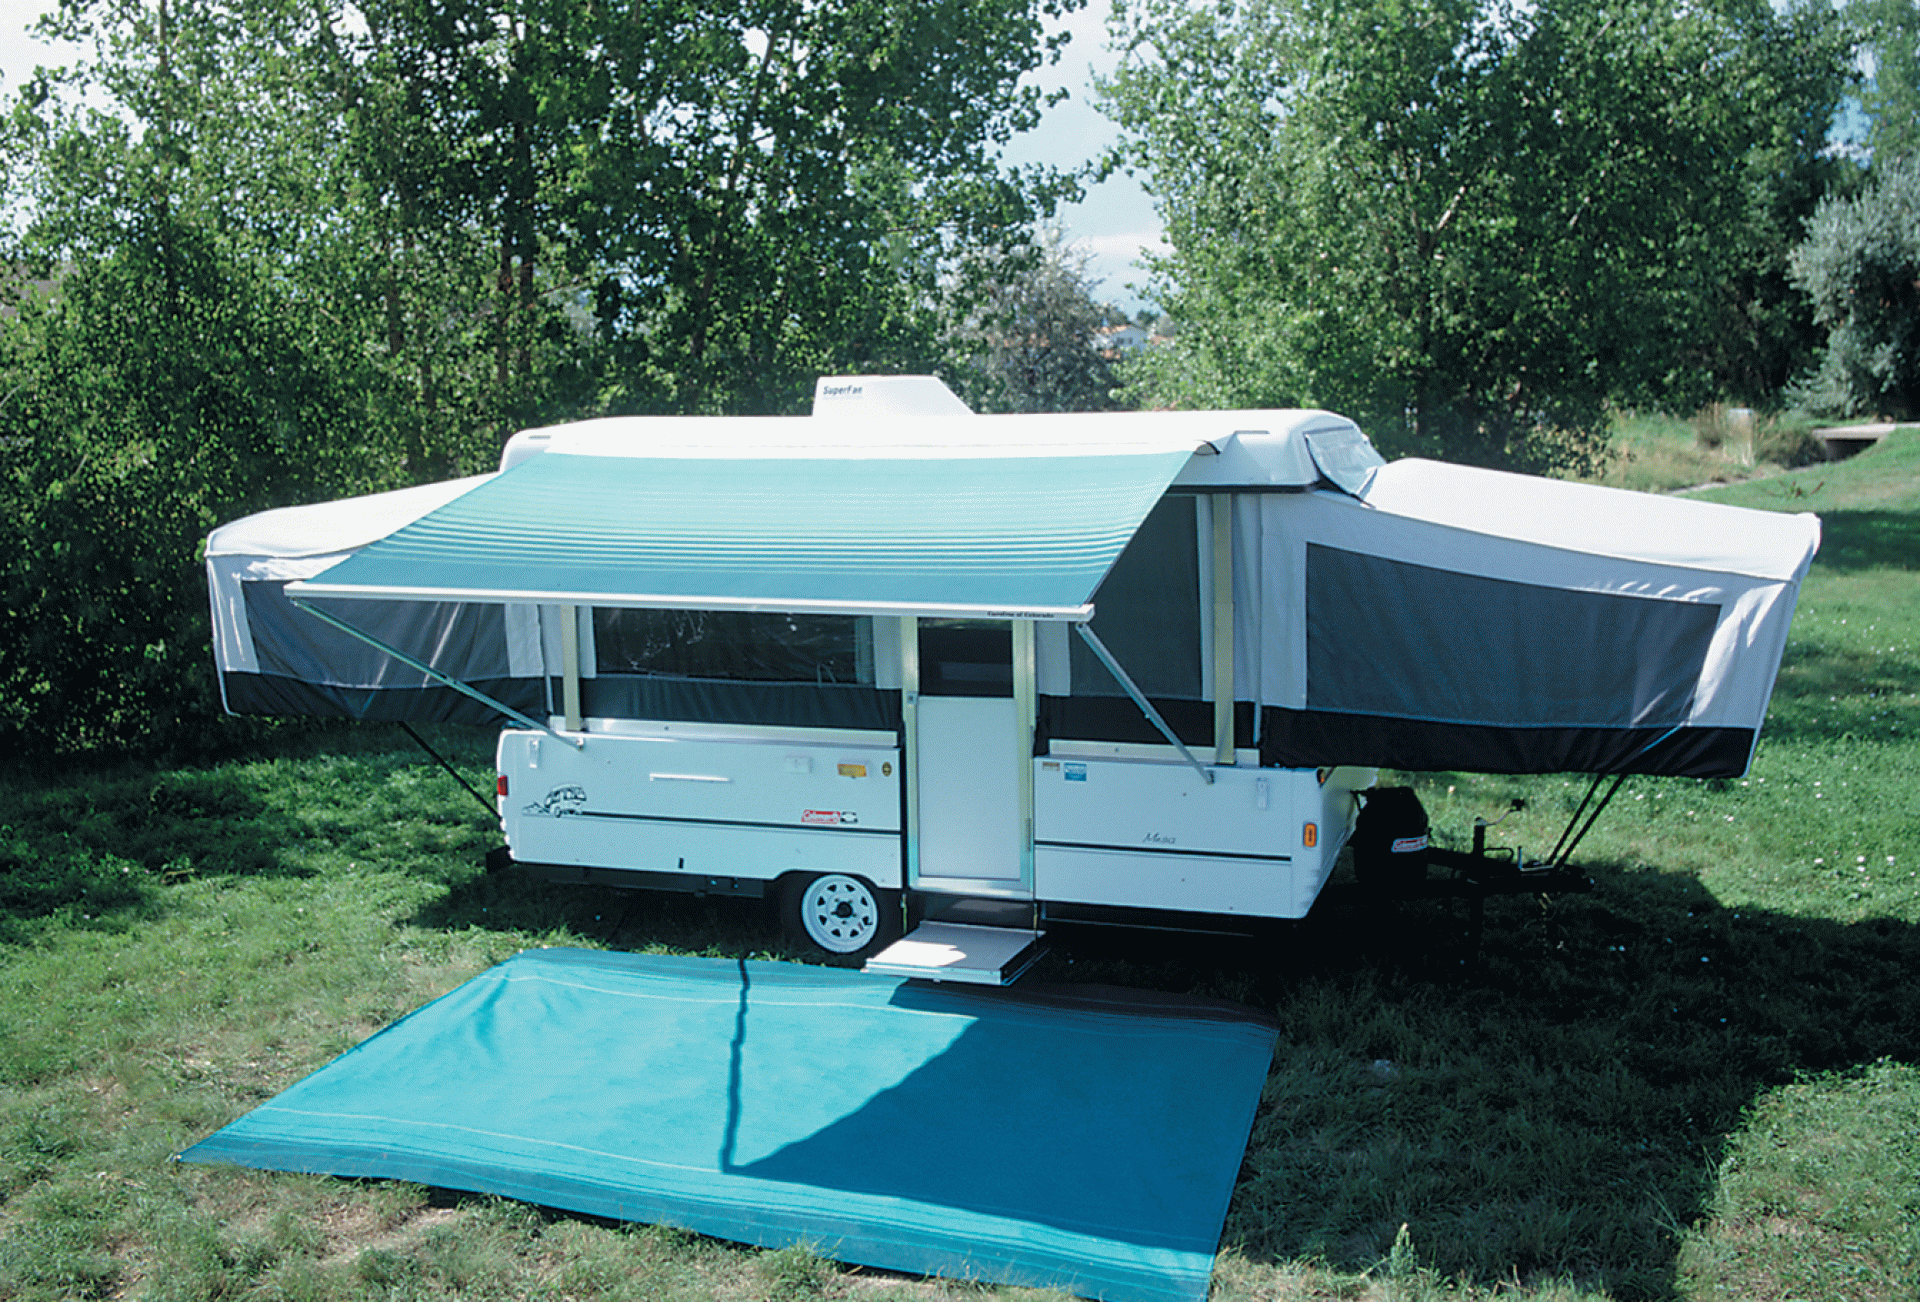 CAREFREE OF COLORADO | 981188C00 | Campout Awning Metric 3.0 Metric 9' 10" Teal Dune Stripe with White Bag